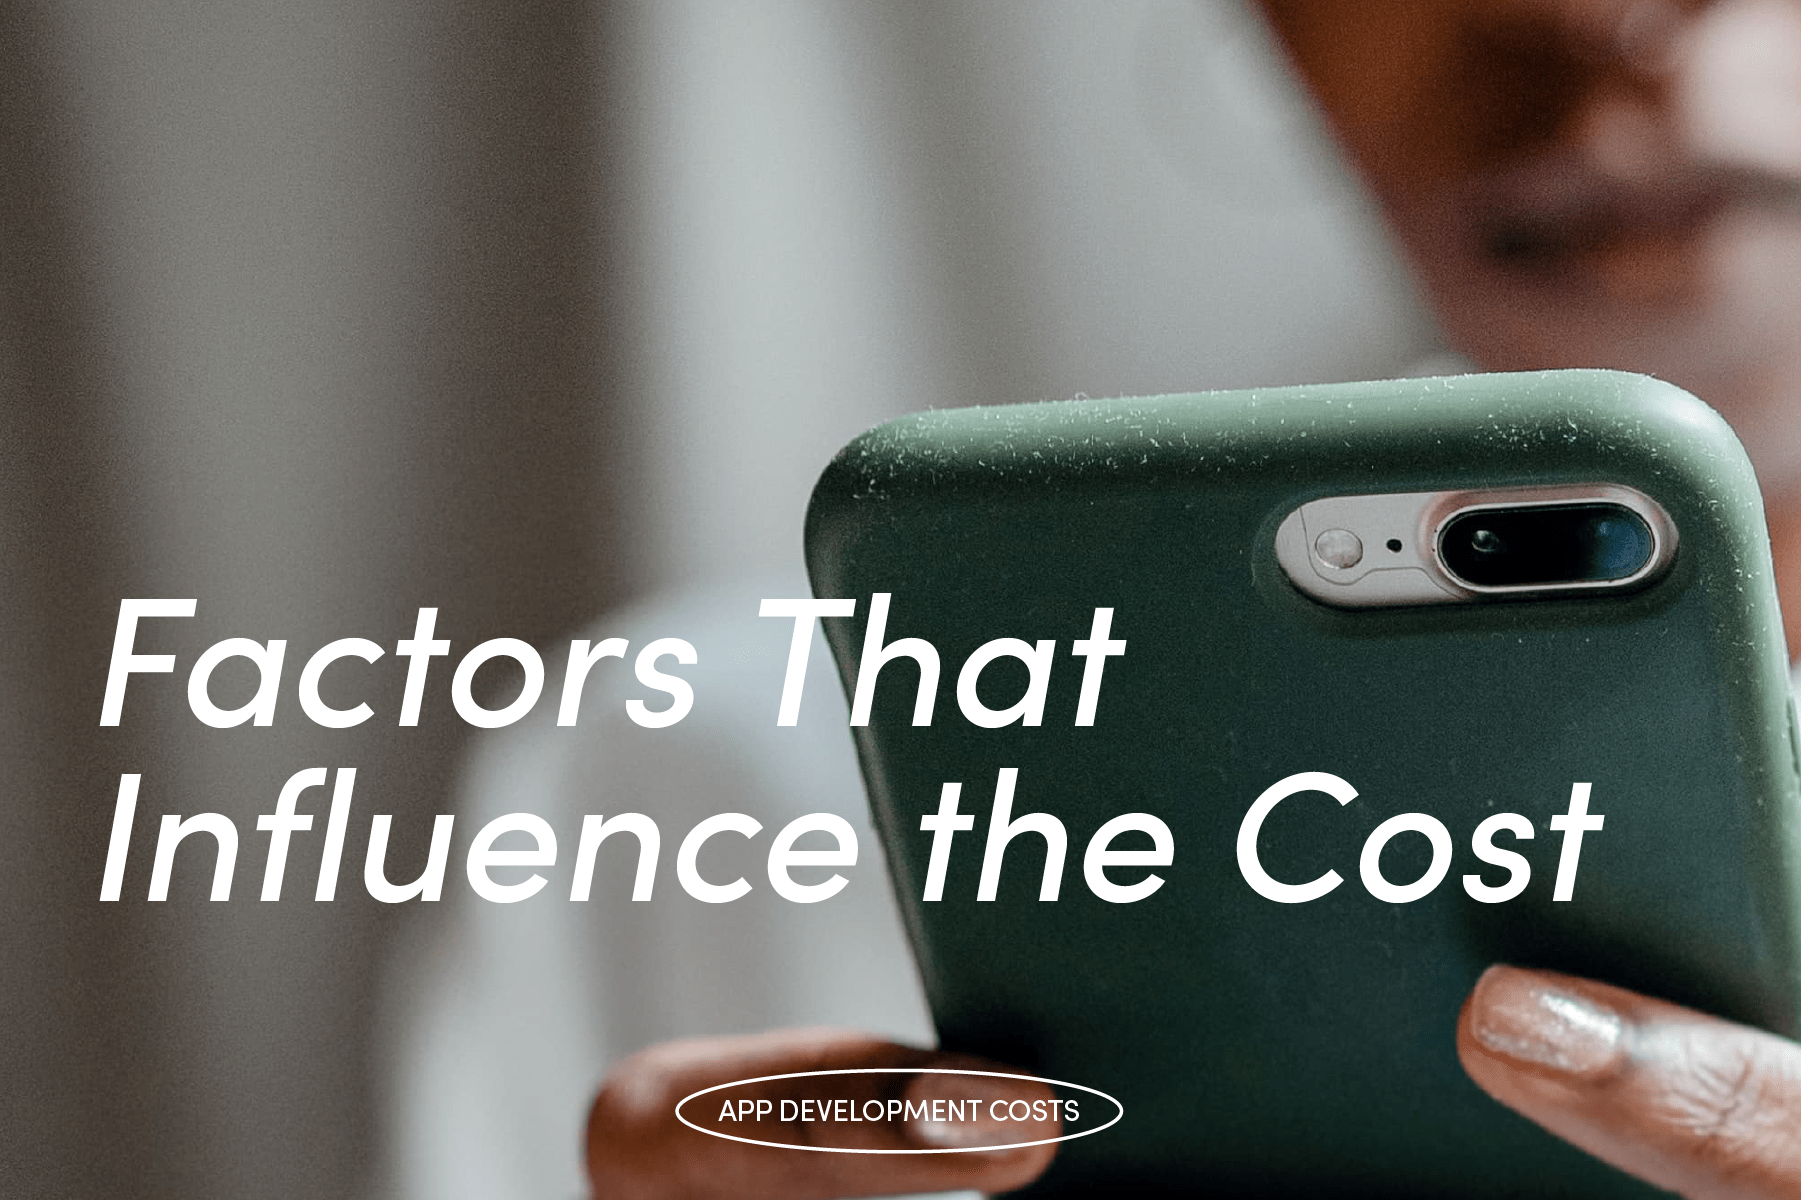 Factors that Influence The Cost